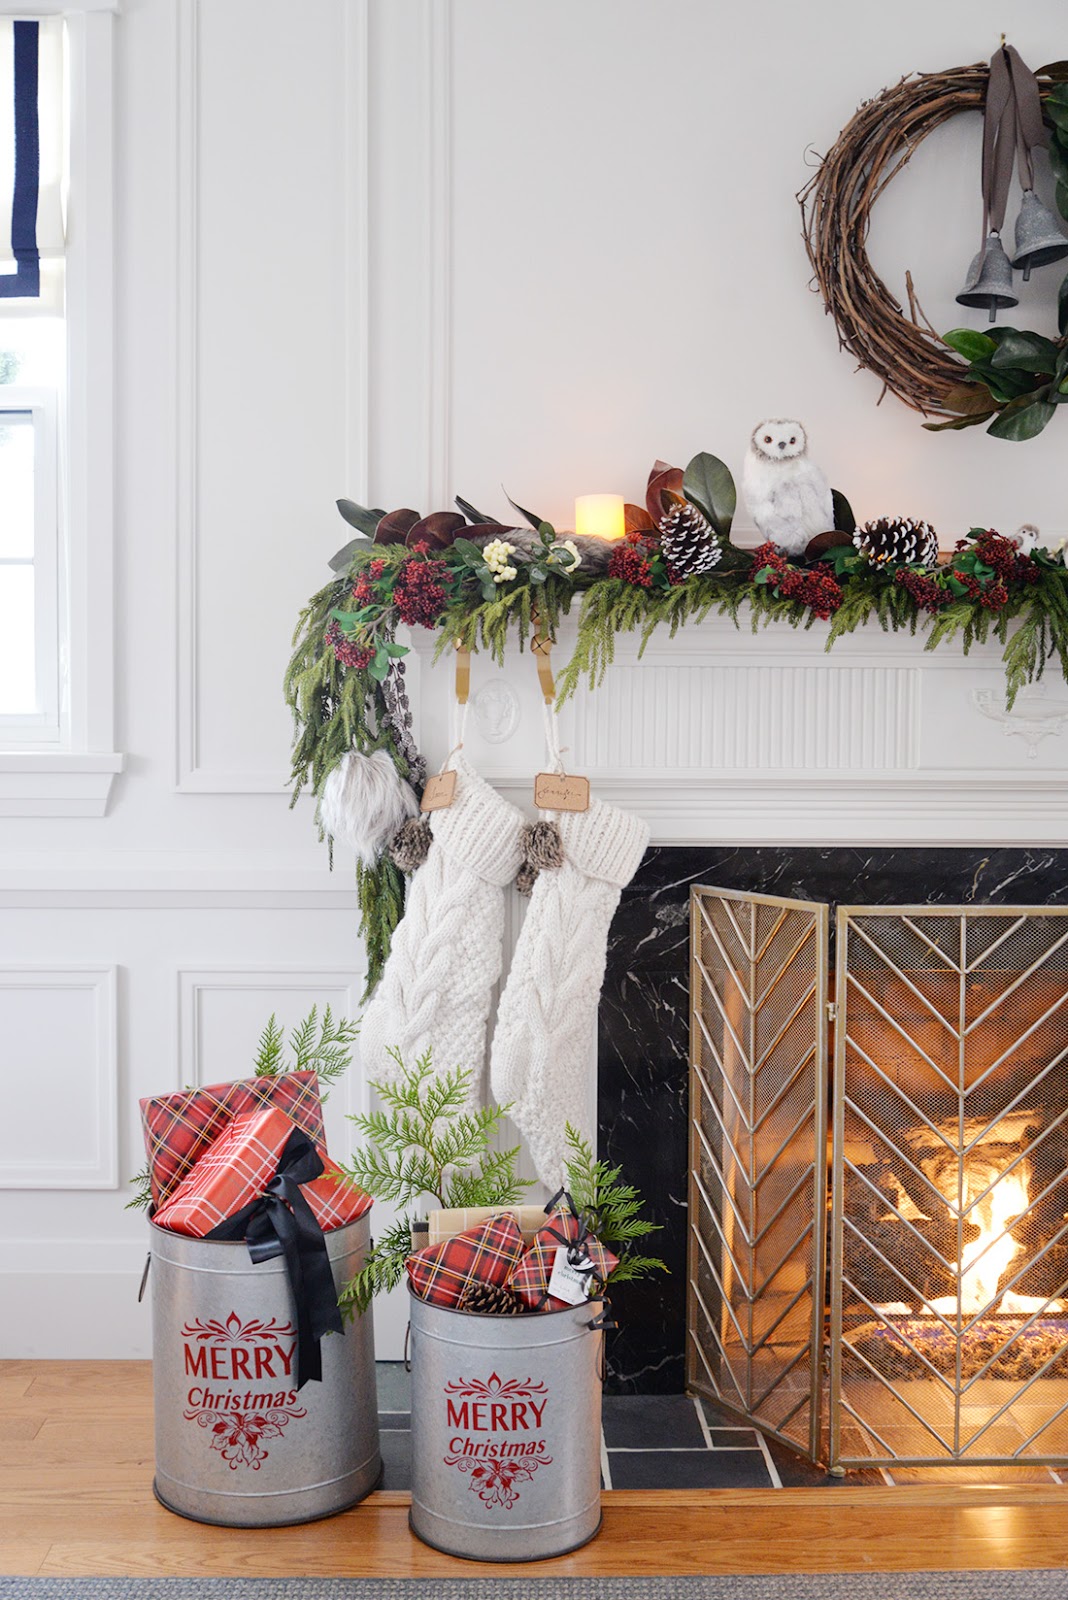 Faux cedar garland. Red and white christmas decorations. Vine and magnolia wreath. Cable knit stockings.